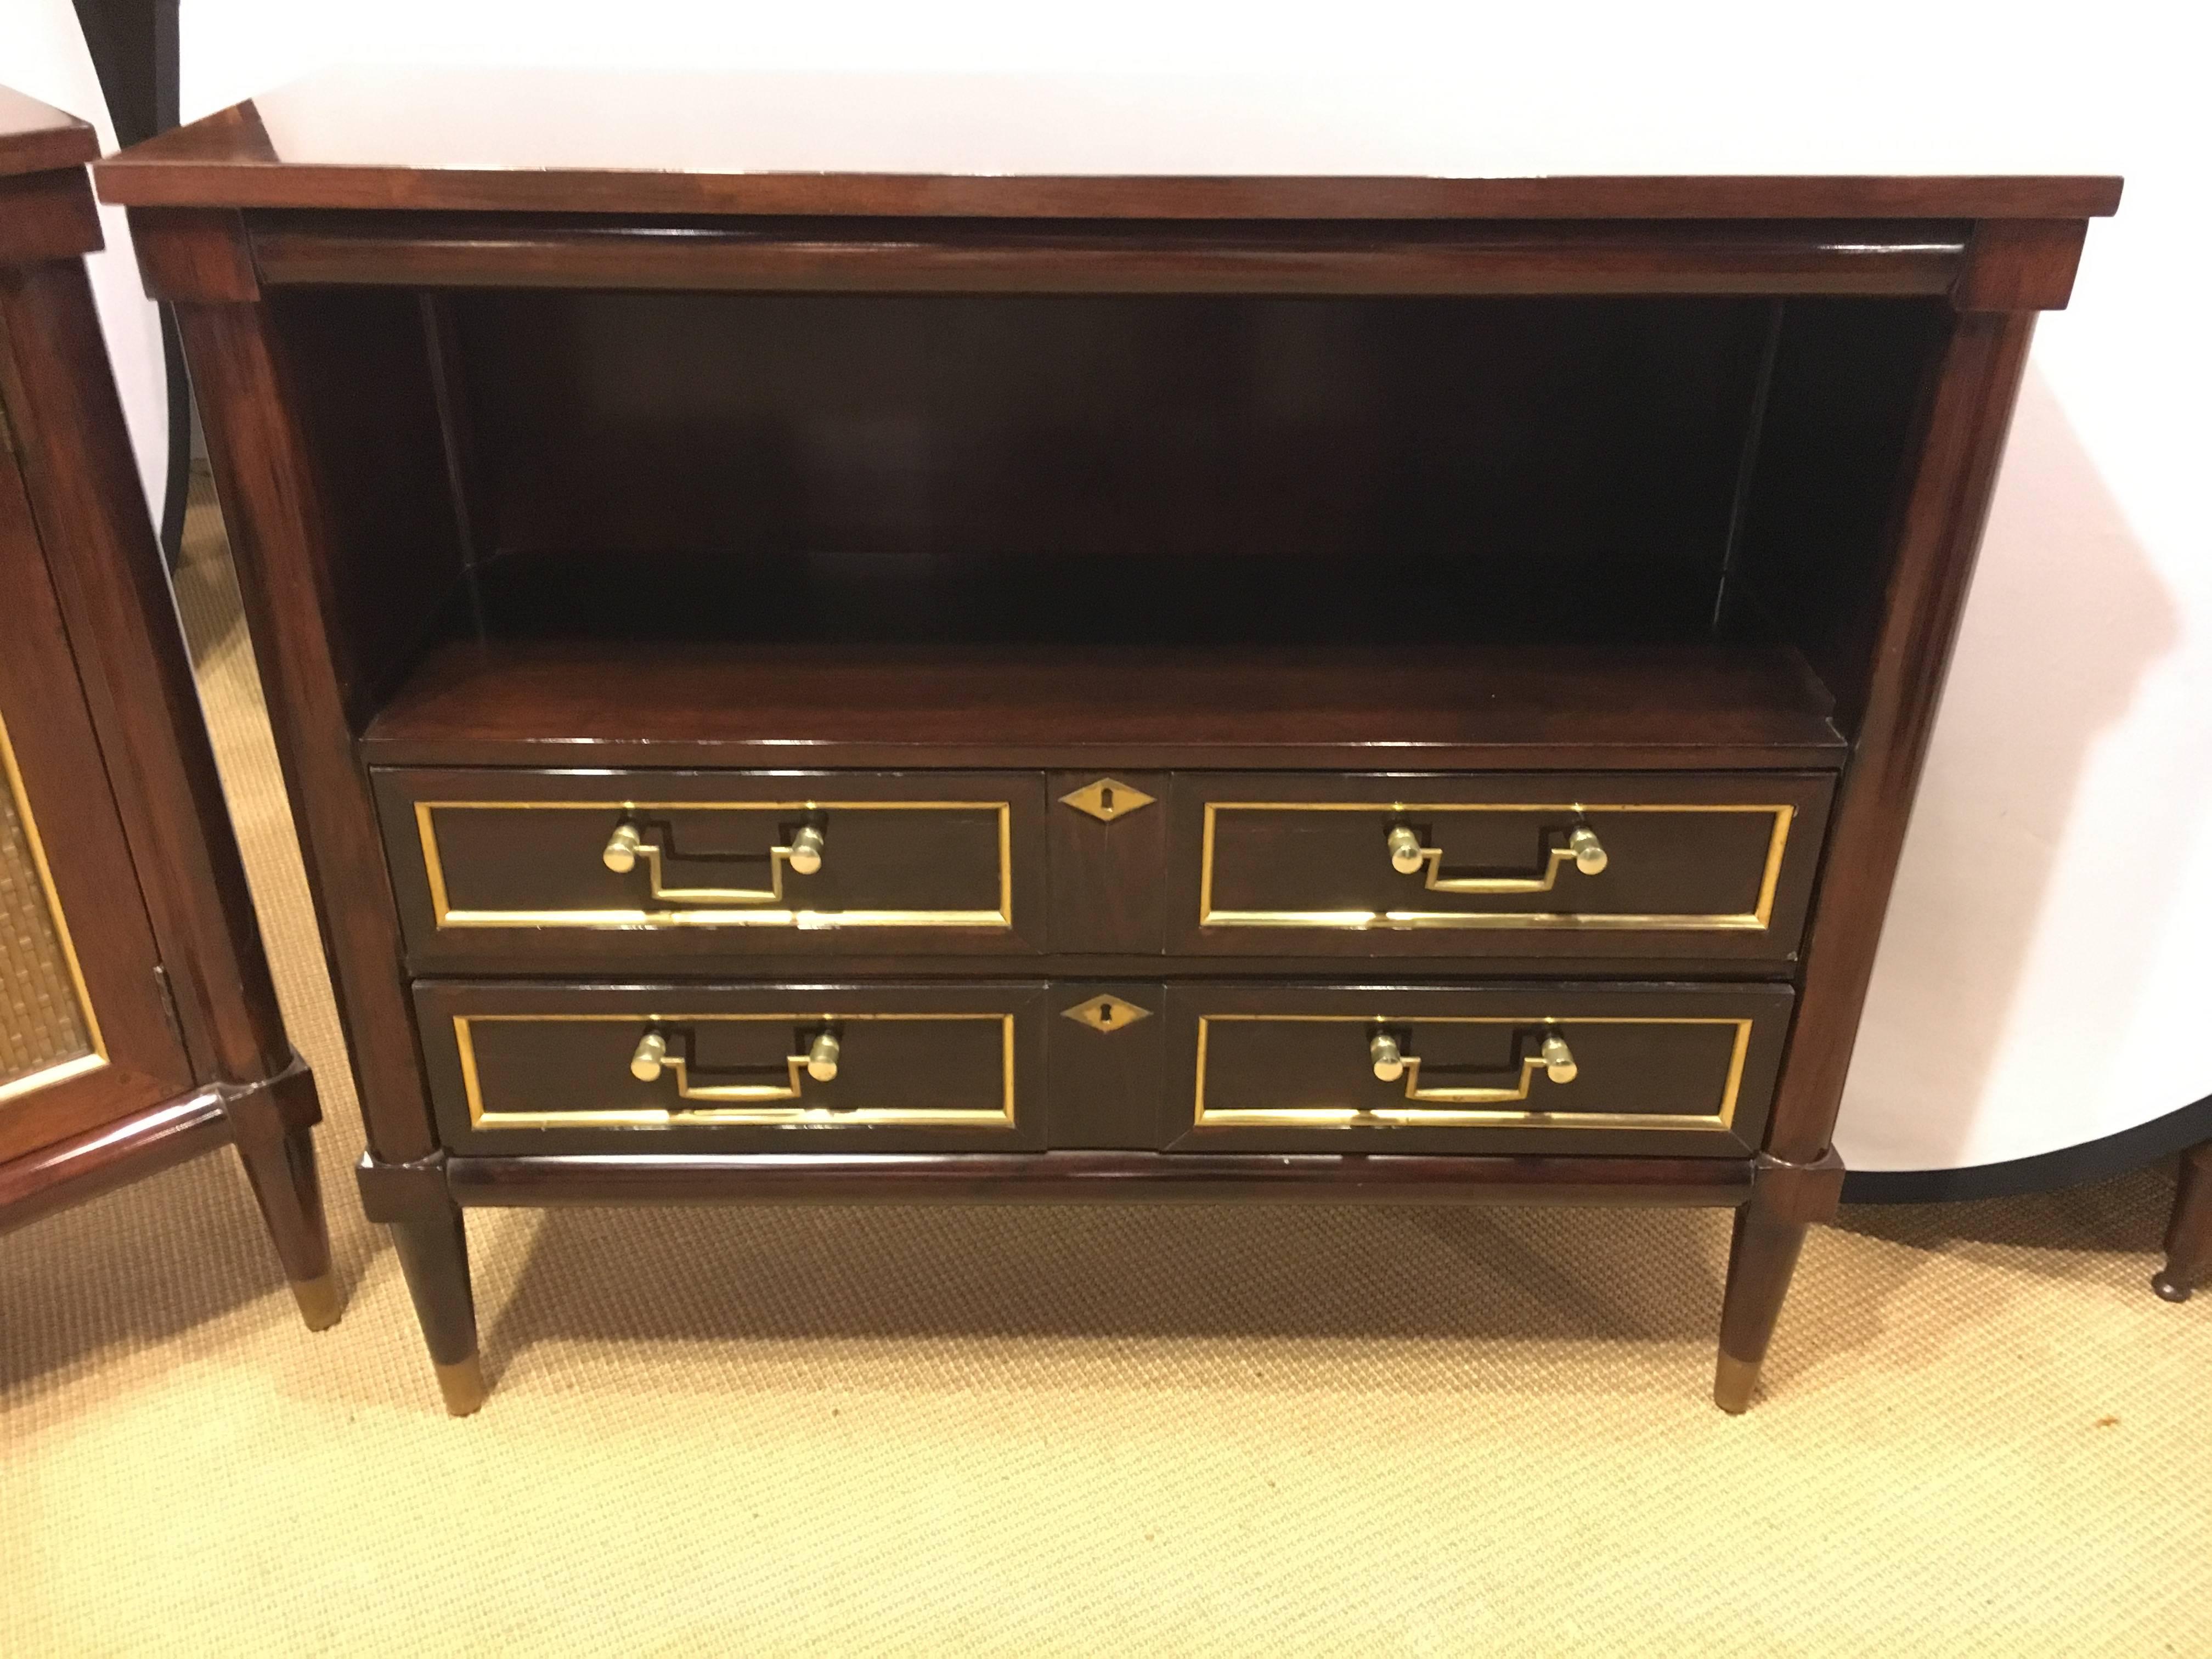 Bedside or end cabinet in the Jansen style. Simply the finest quality in this bronze framed mahogany cabinet or bedside stand. The case having an open bookcase over two custom crafted drawers. The front and sides having bronze framing mounts.